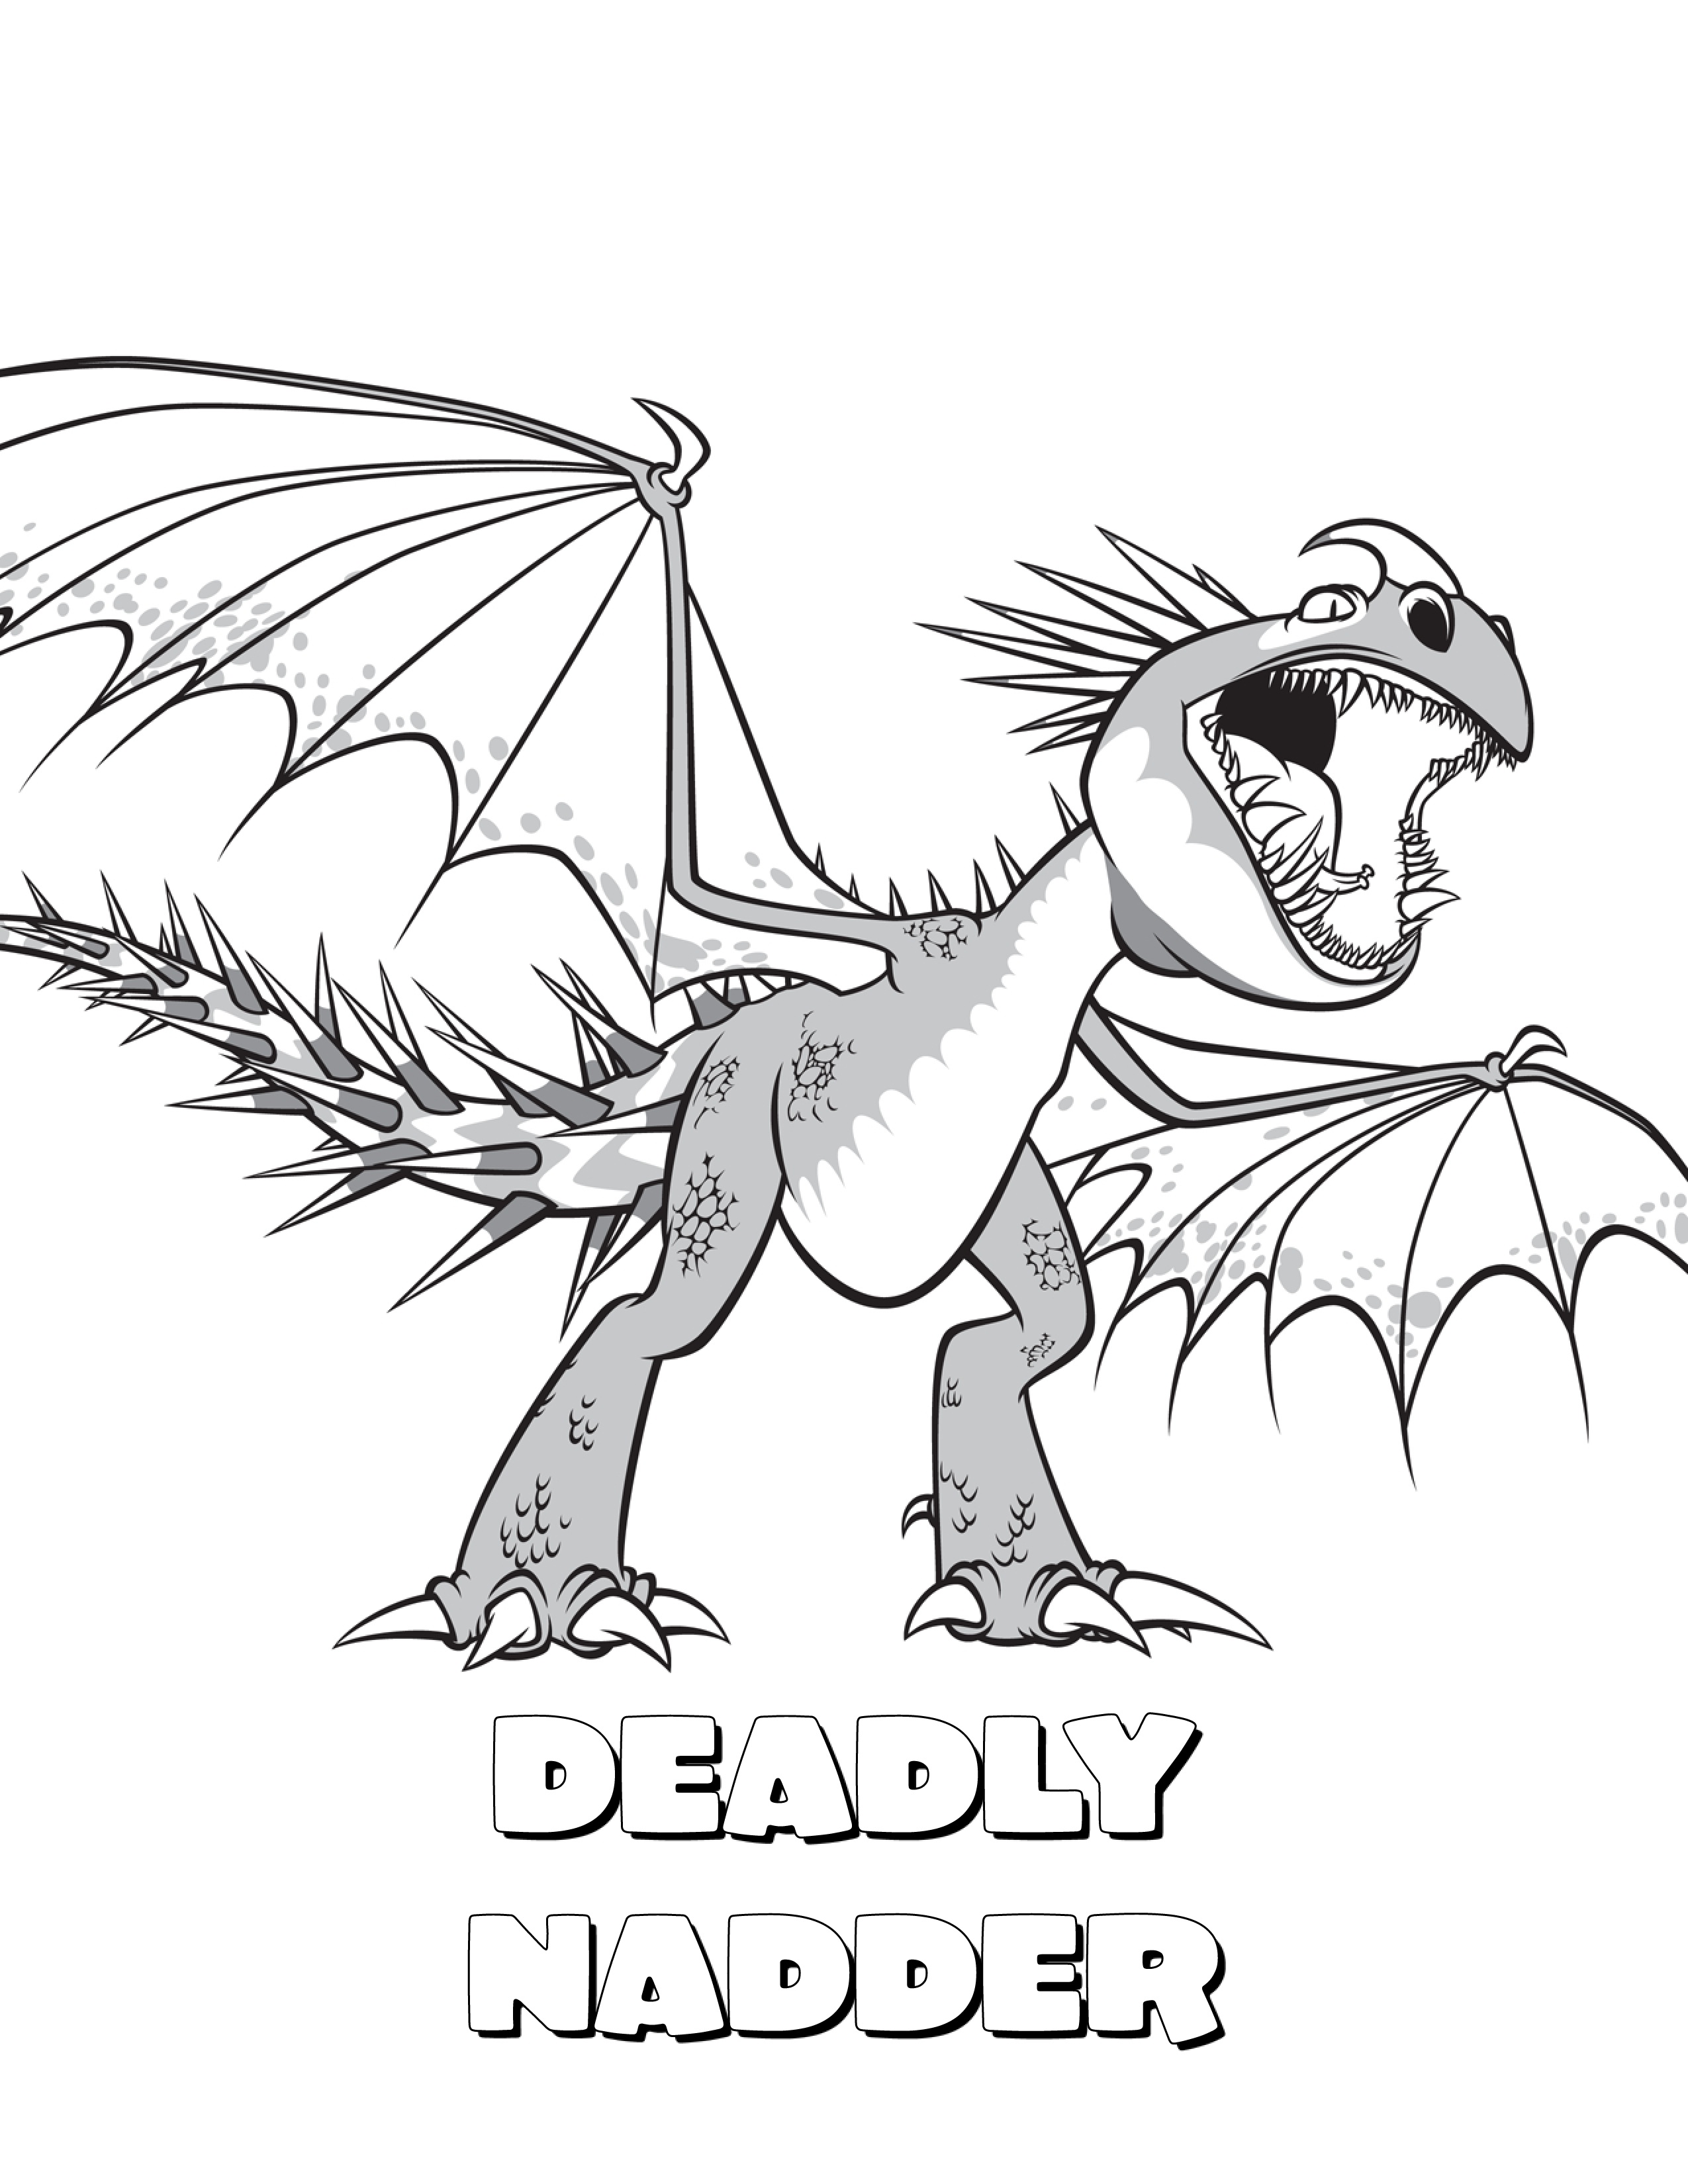 How to Train Your Dragon Coloring Pages Best Coloring Pages For Kids